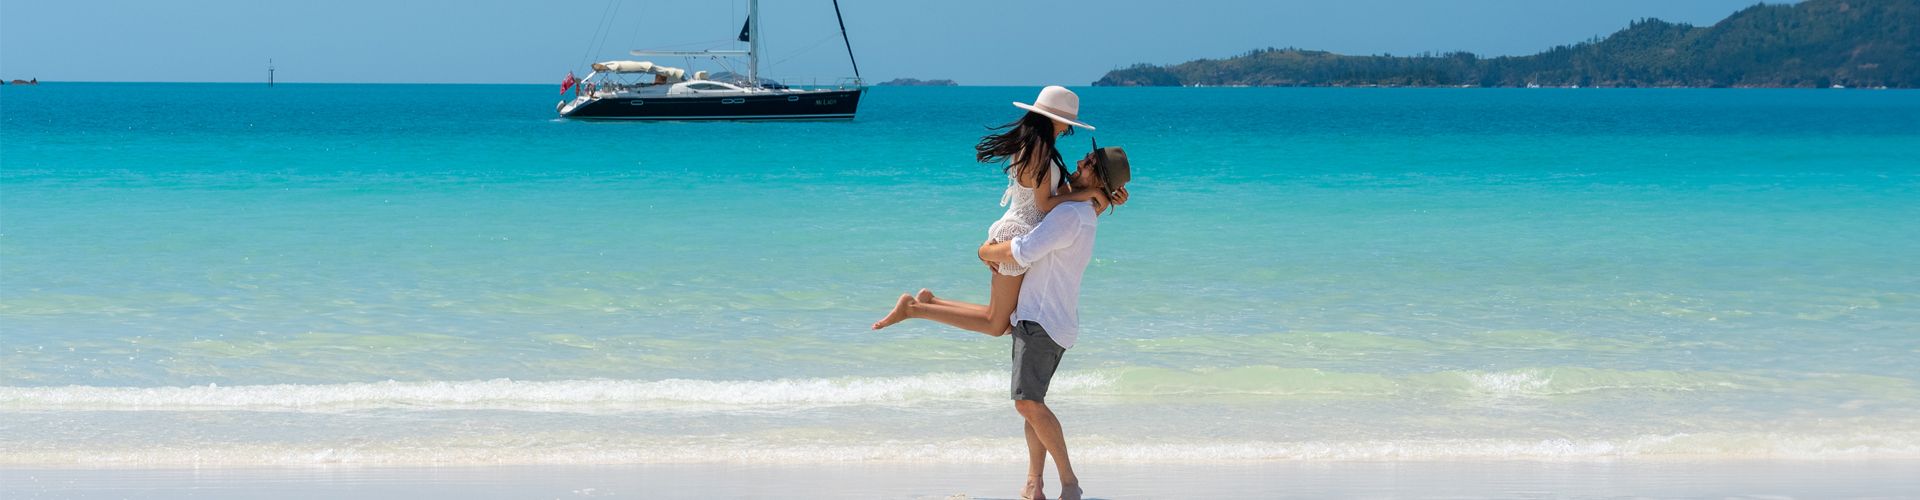 Romantic Getaway Packages - Sailing Whitsunday Image